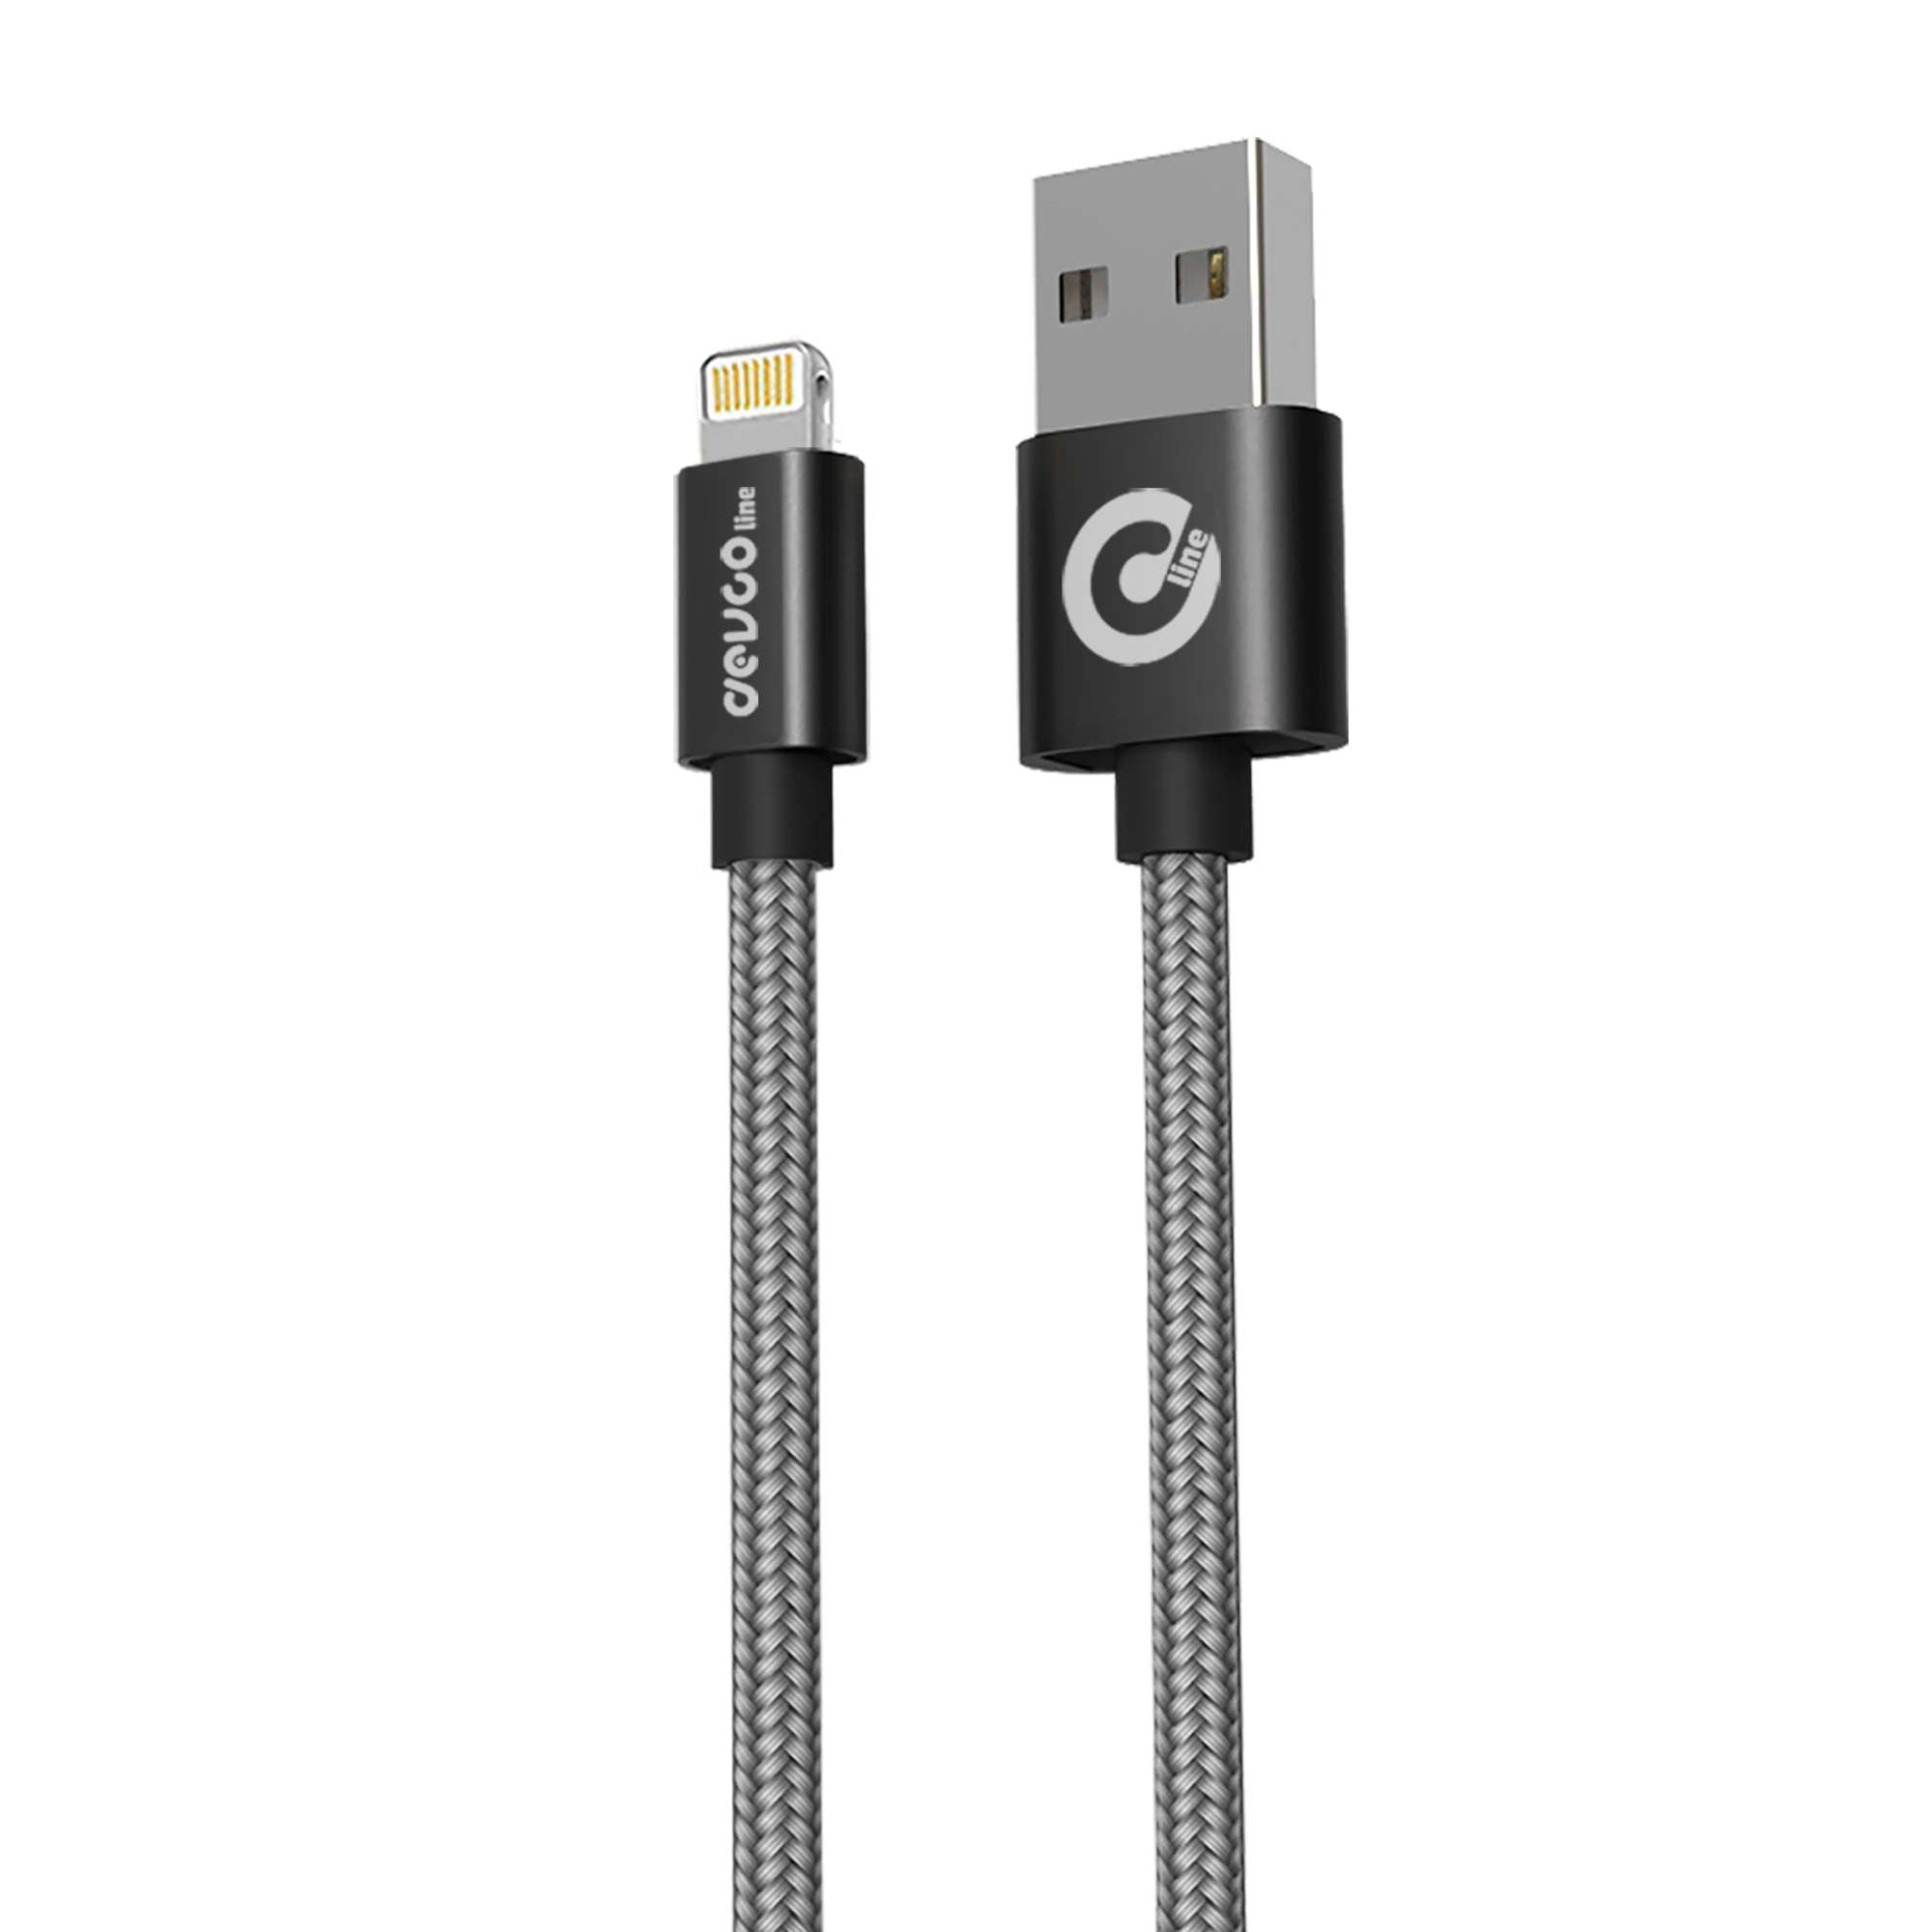 USB cable compatible with iPhone 2m fast charging USB-A connection - AT CR IPH2